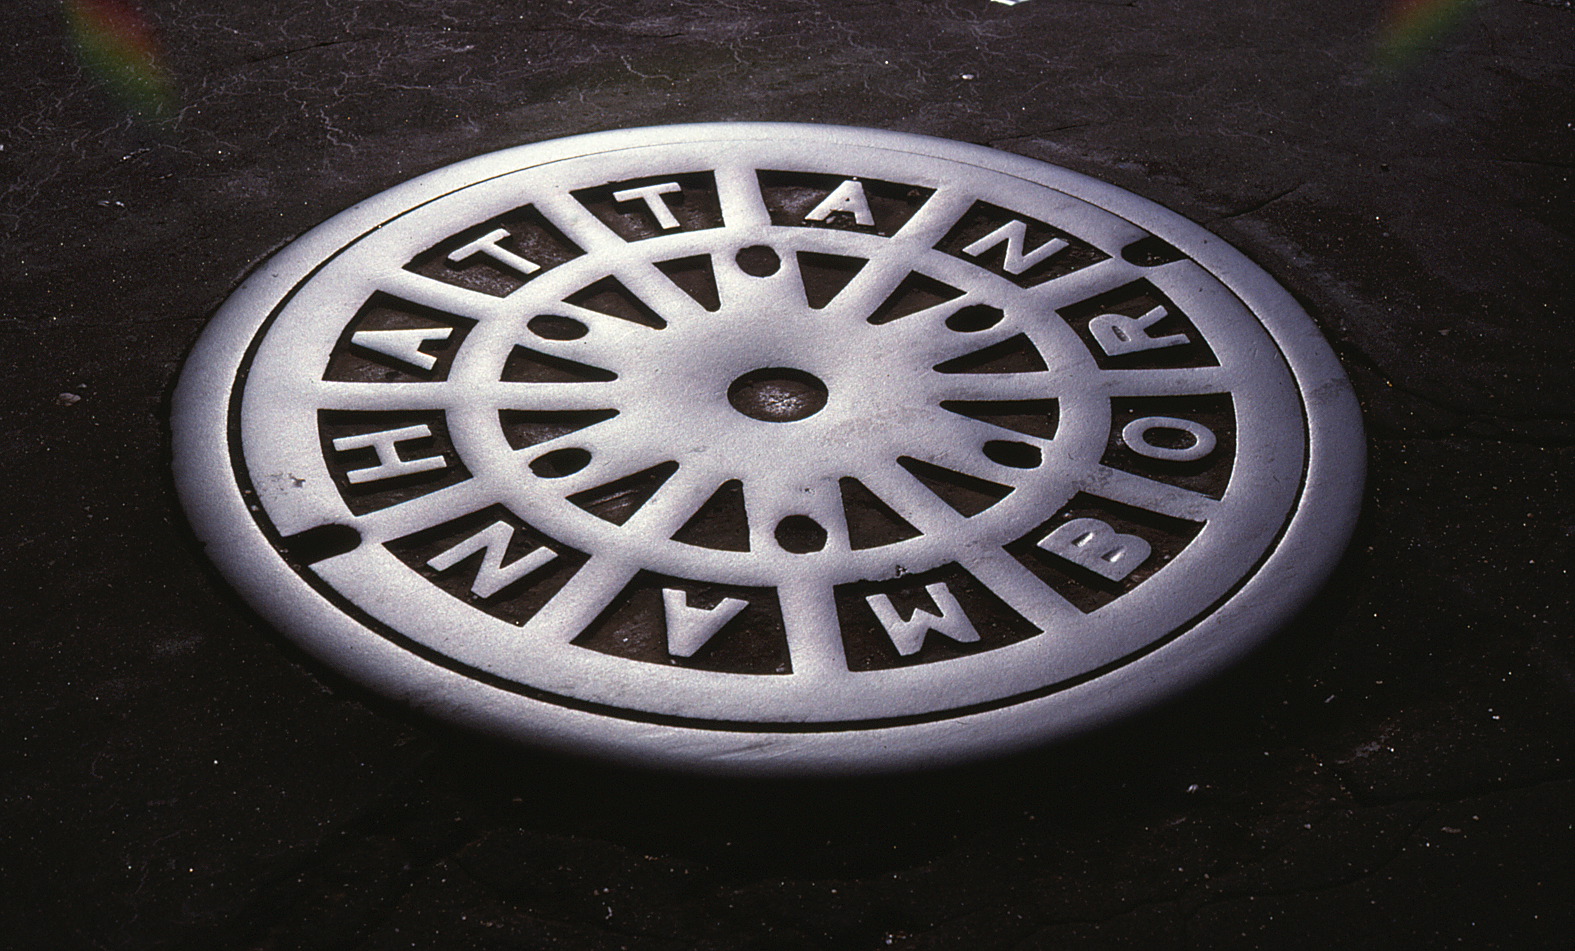 Manhole cover with Manhattan spelled out on it.